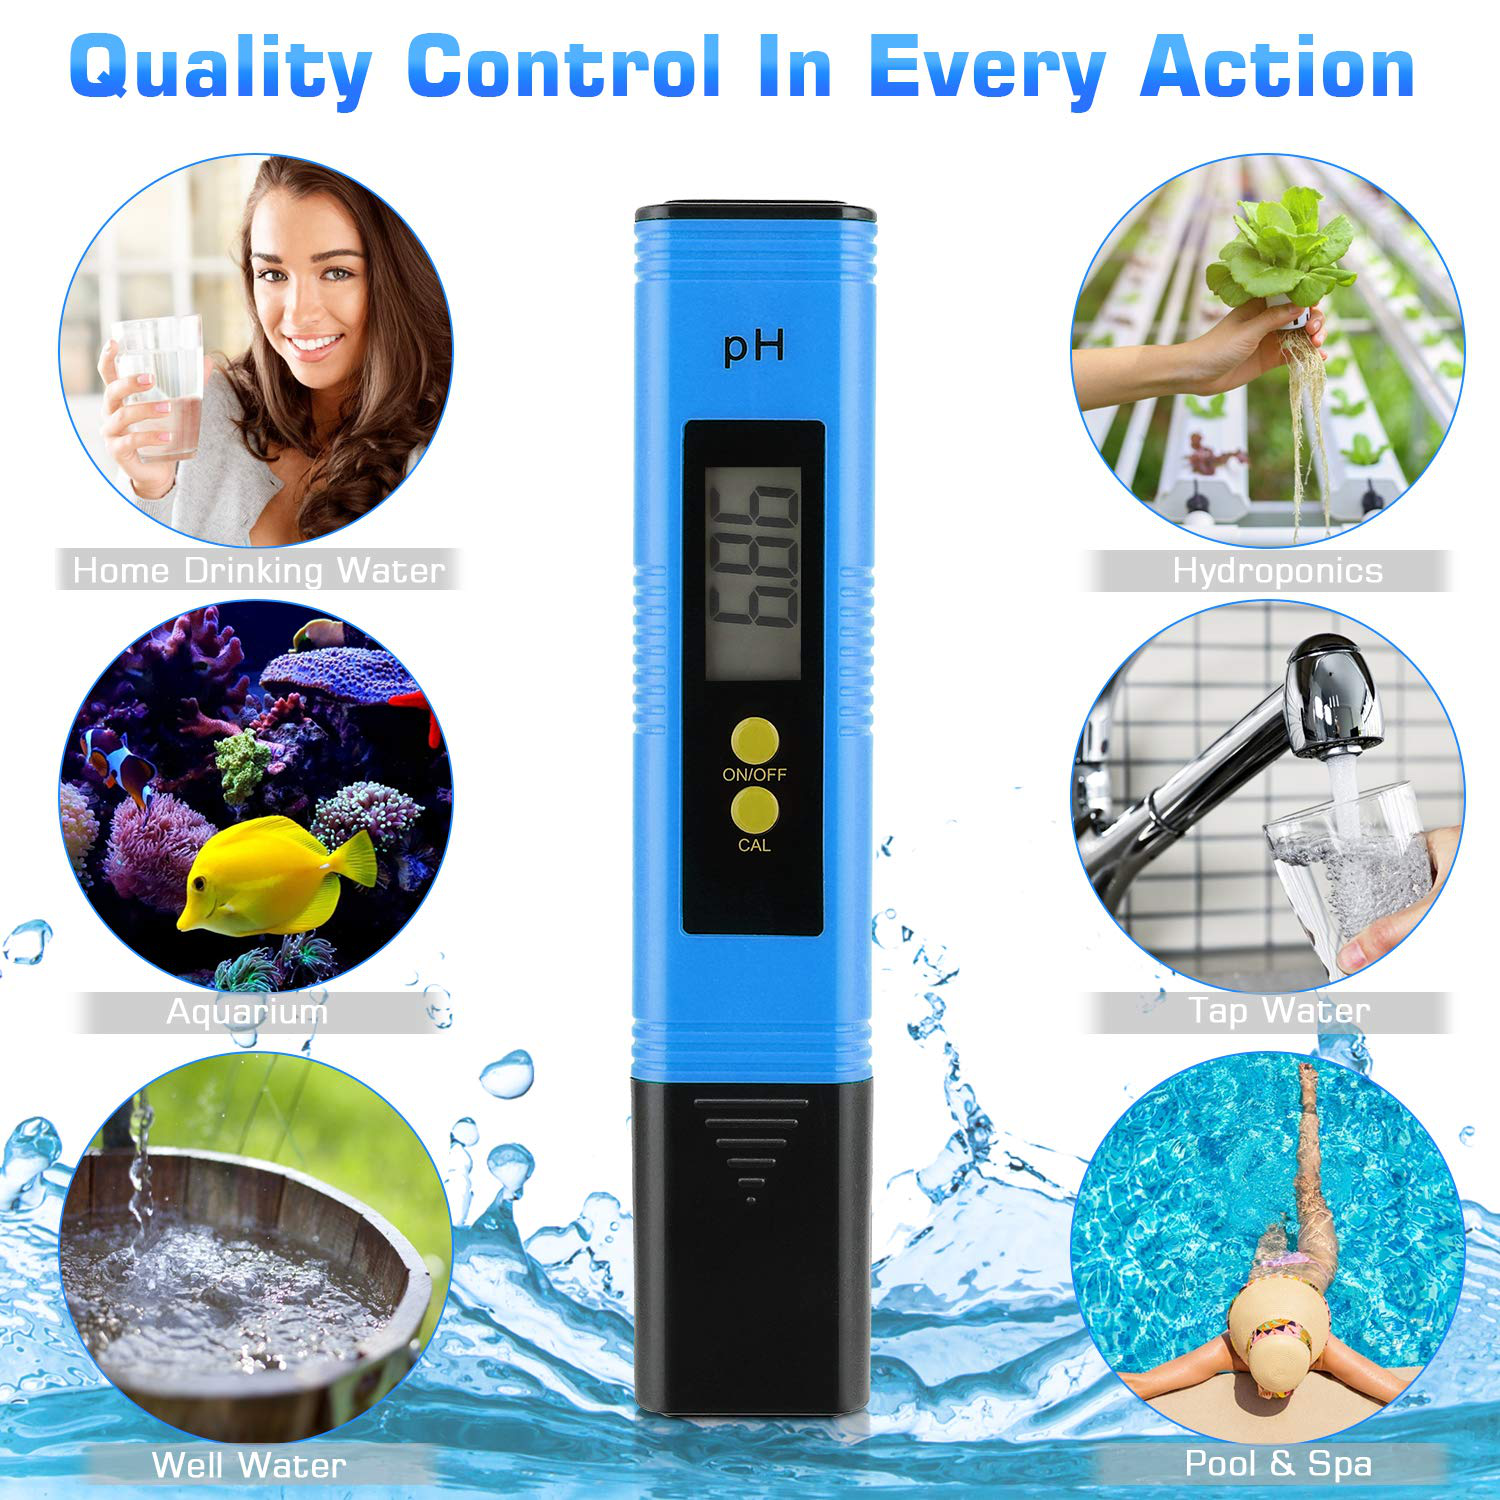 PH Meter for Water Hydroponics Digital PH Tester Pen 0.01 High Accuracy Pocket Size with 0-14 PH Measurement Range for Household Drinking, Pool and Aquarium (Blue)